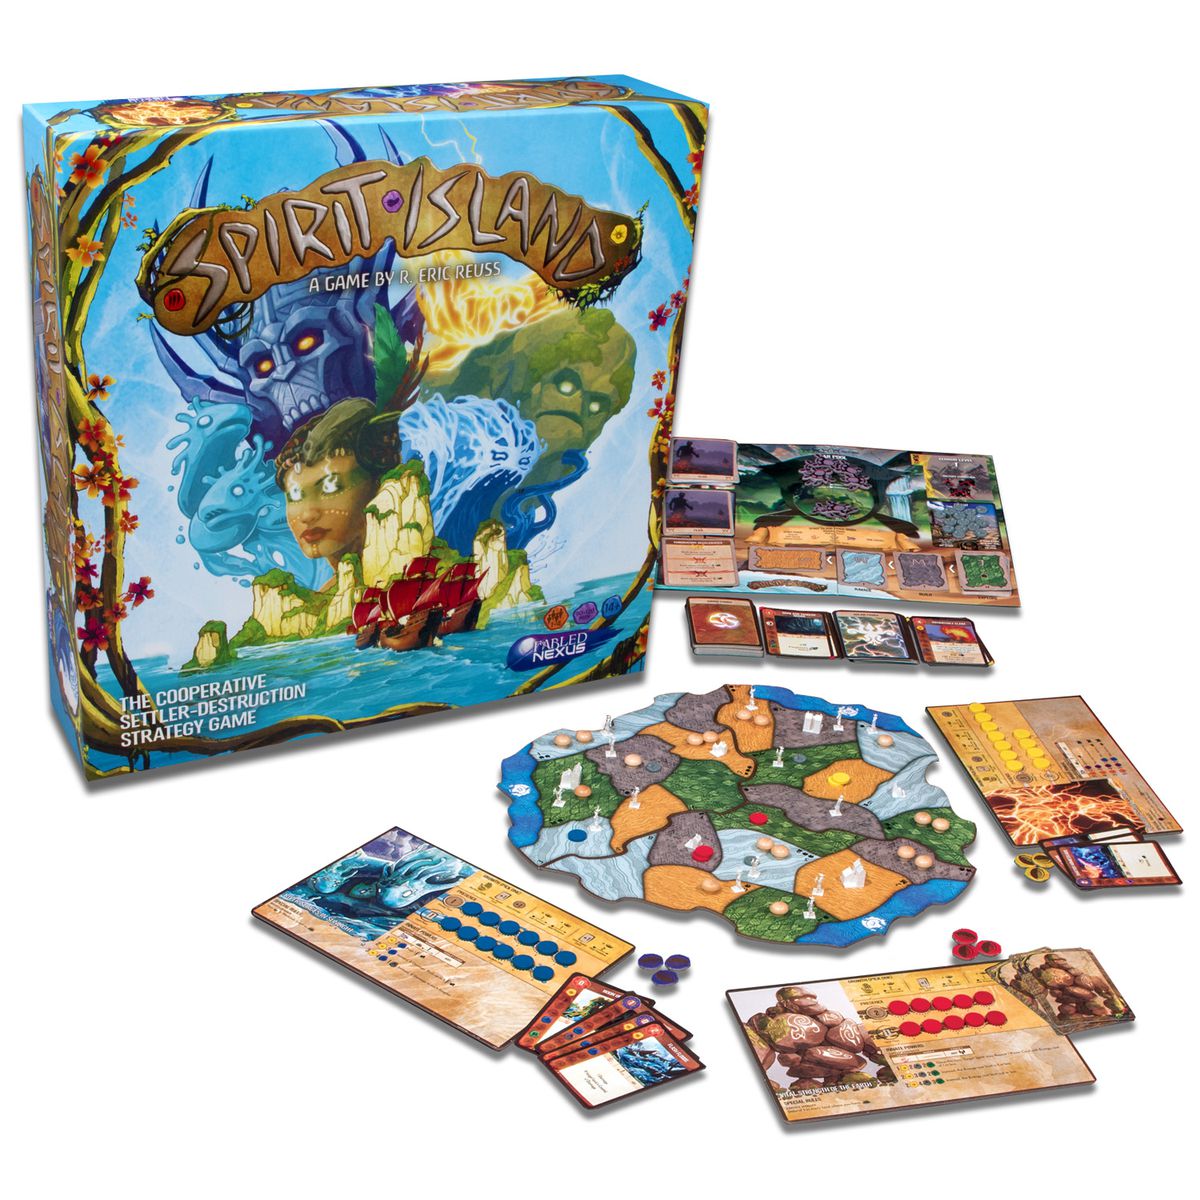 Spirit Island features bright colors, a gamer sideboard, and fun little plastic flags all over the map.